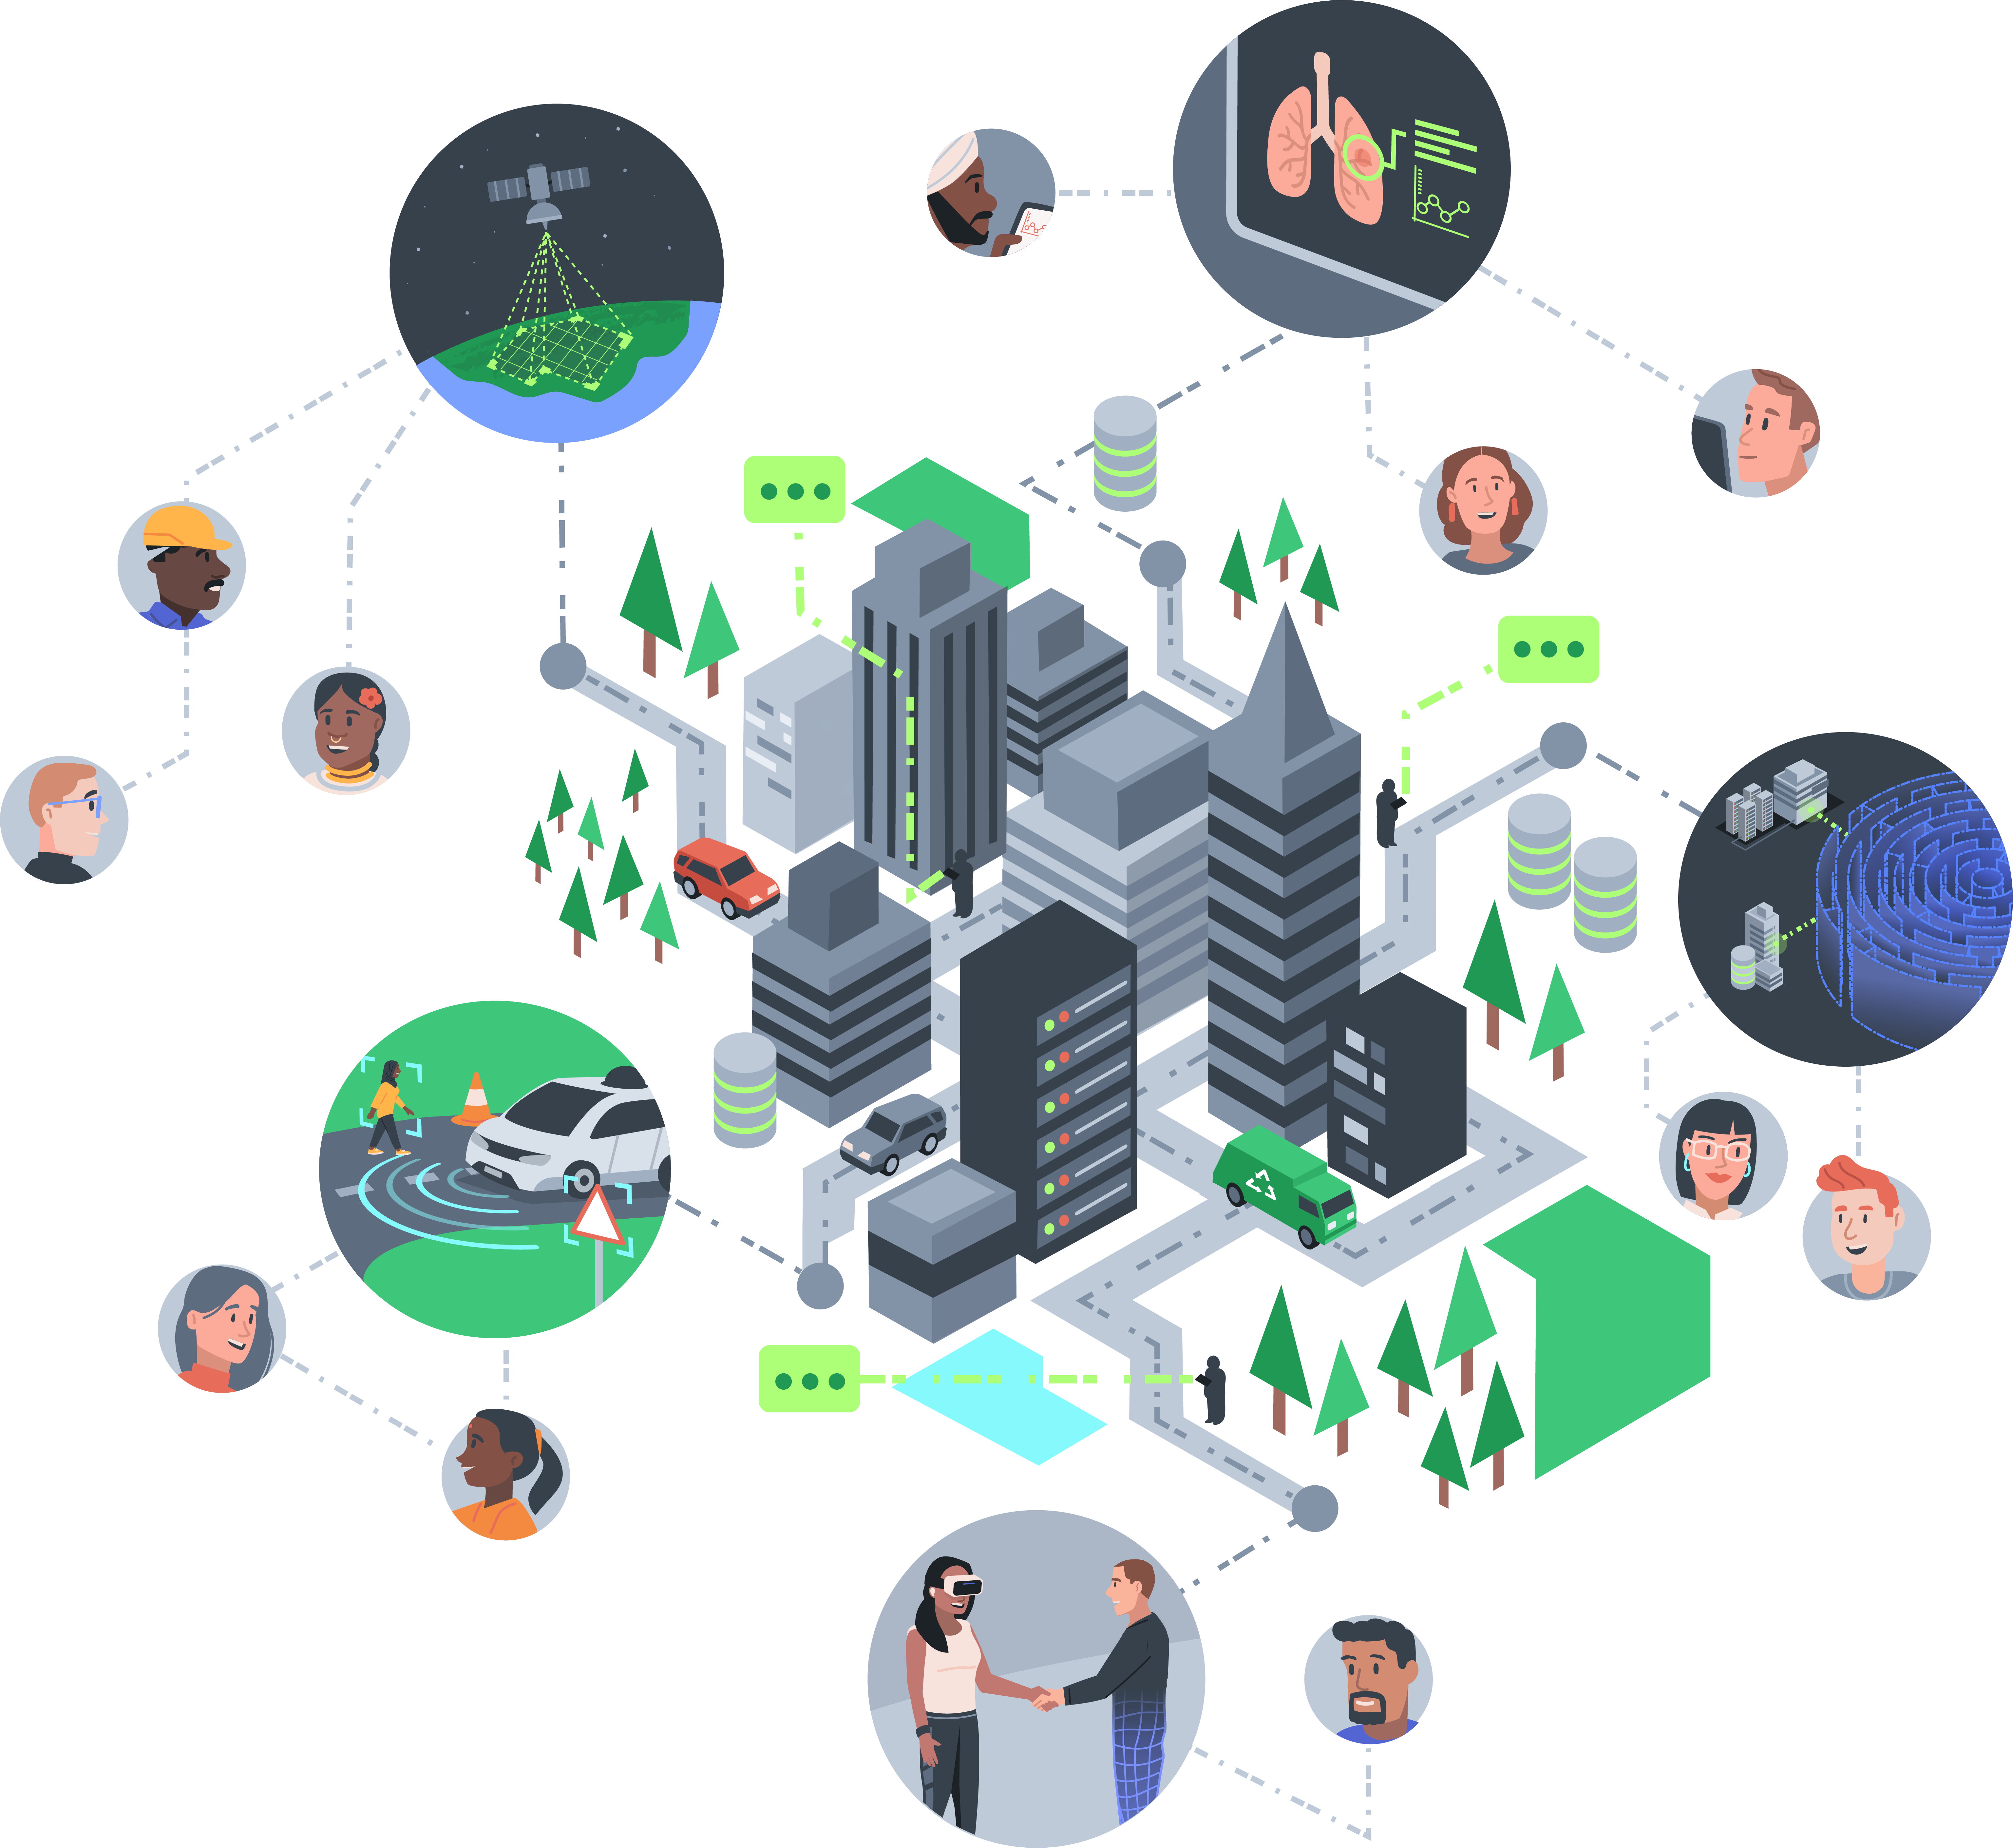 Illustration of a smart city with a central skyscraper linked by dotted lines to icons depicting autonomous vehicles, sustainable energy, and digital communication. Peripheral circles show interactions like a virtual handshake, medical diagnostics, and satellite communication, emphasizing a connected, tech-integrated urban environment.